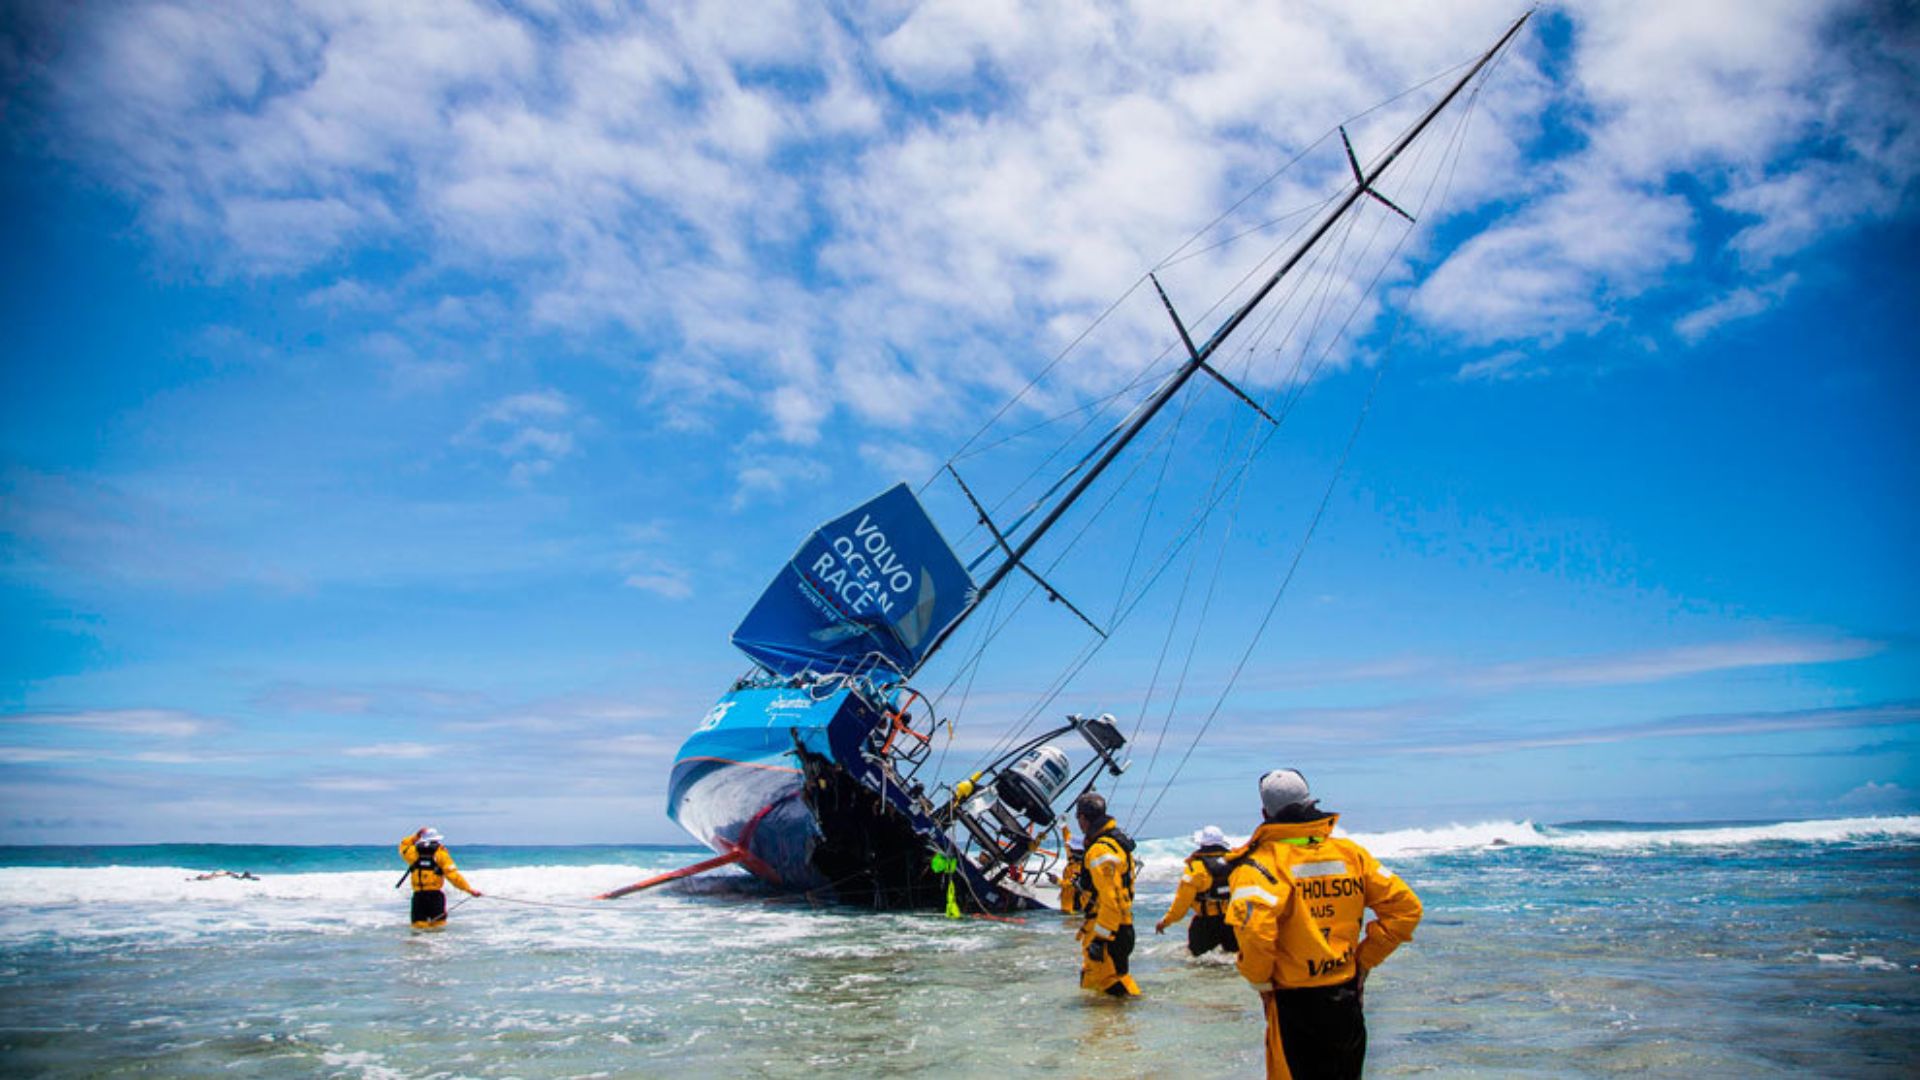 Accidents in the Ocean Race history